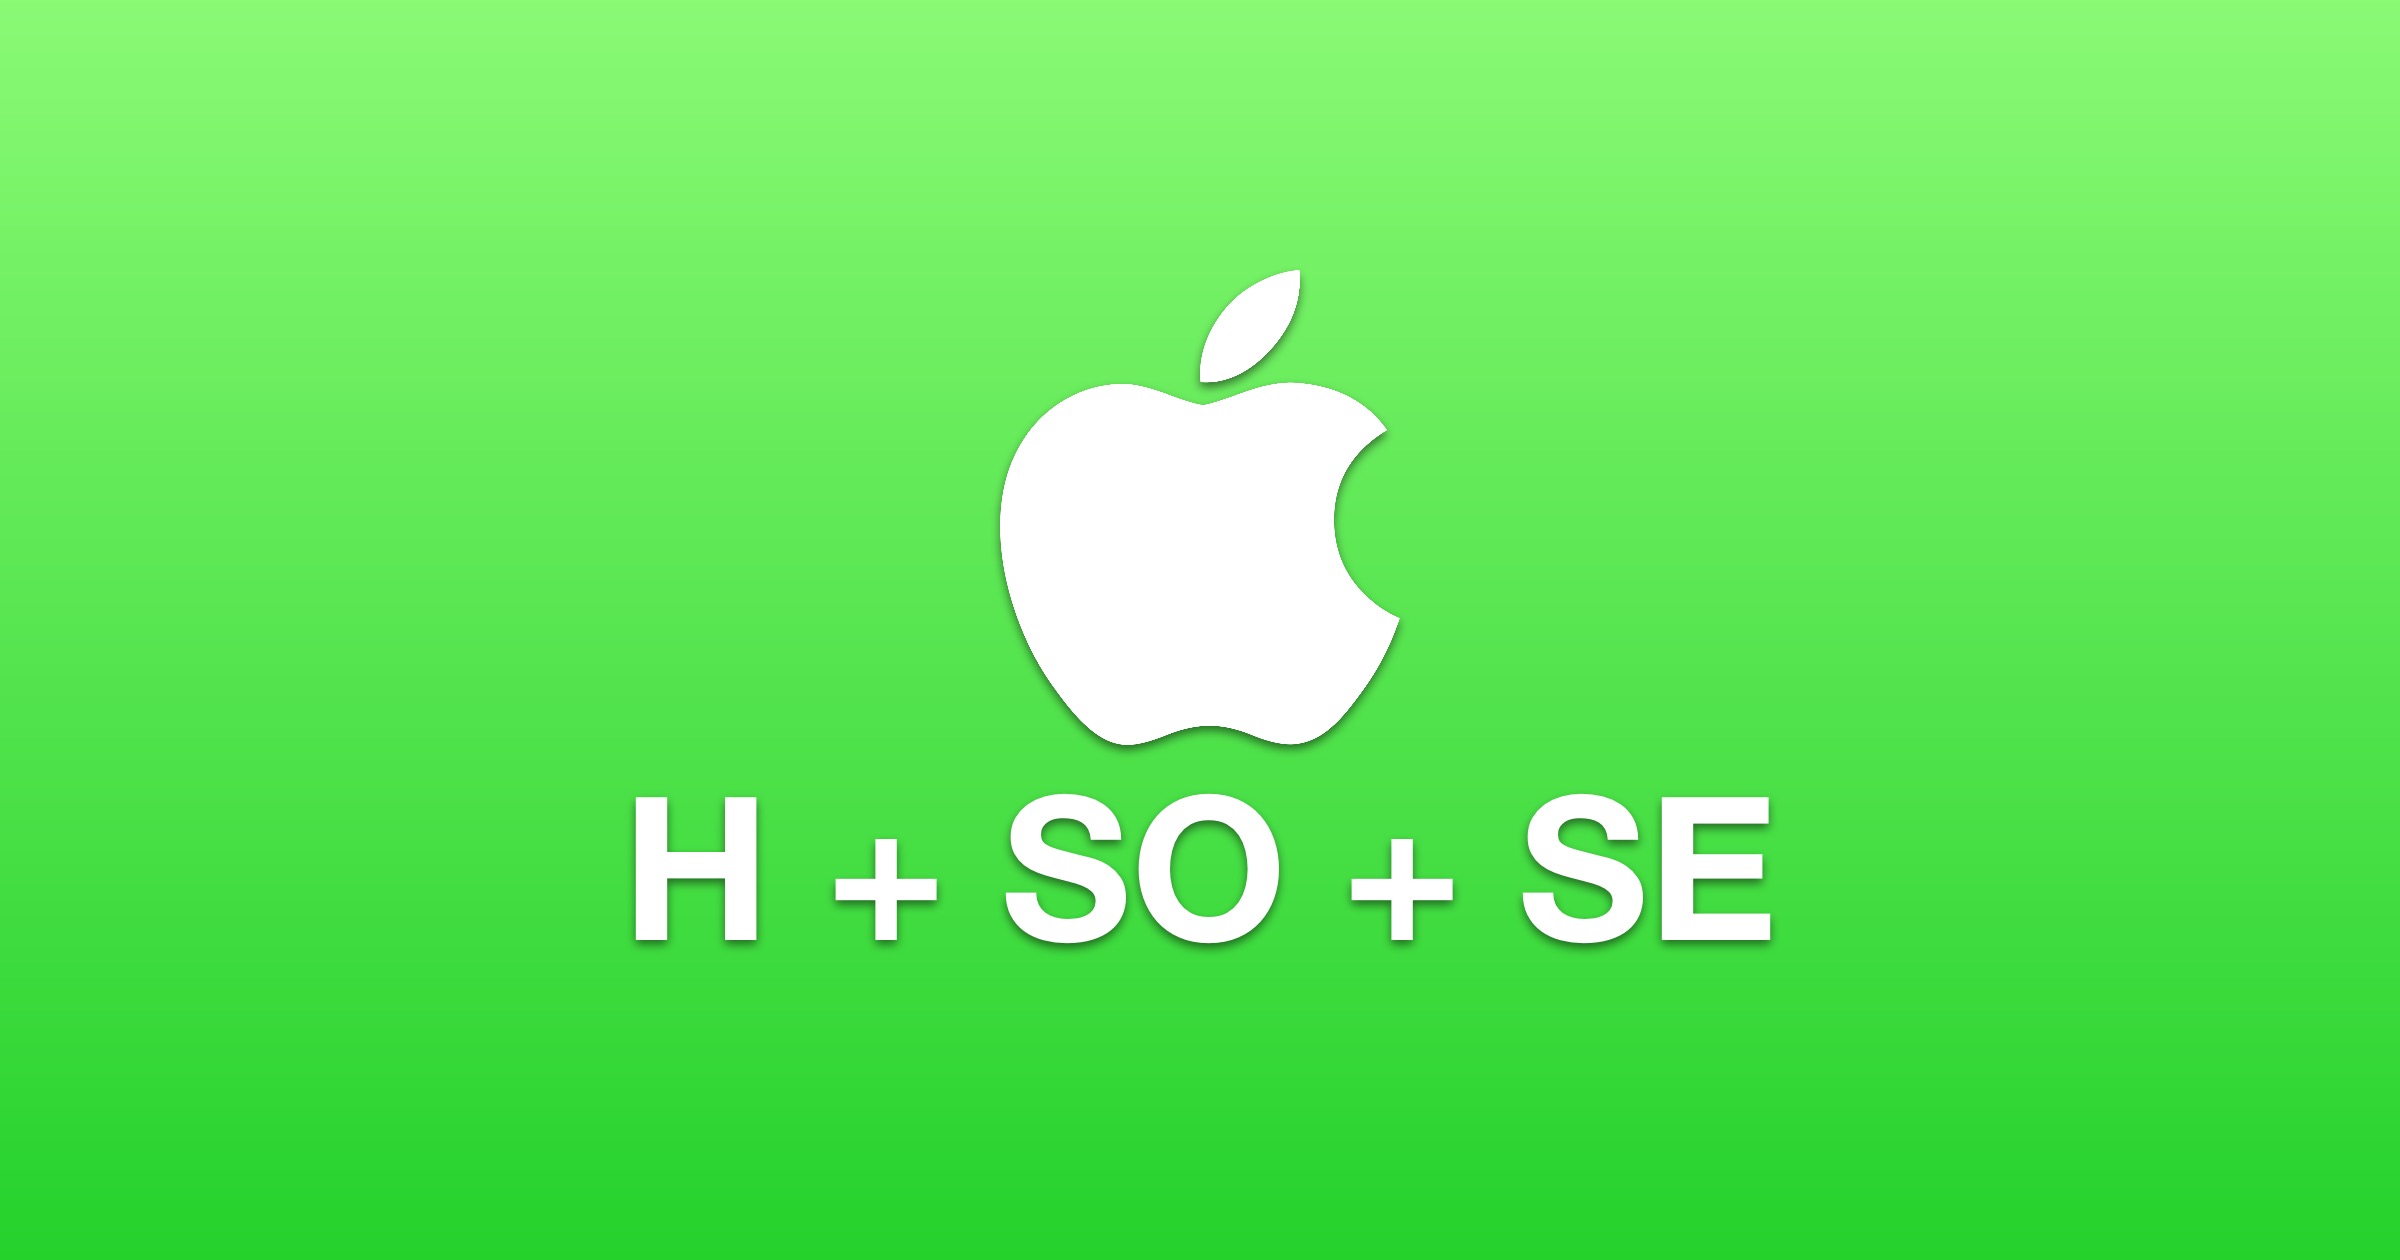 Apple hardware software services